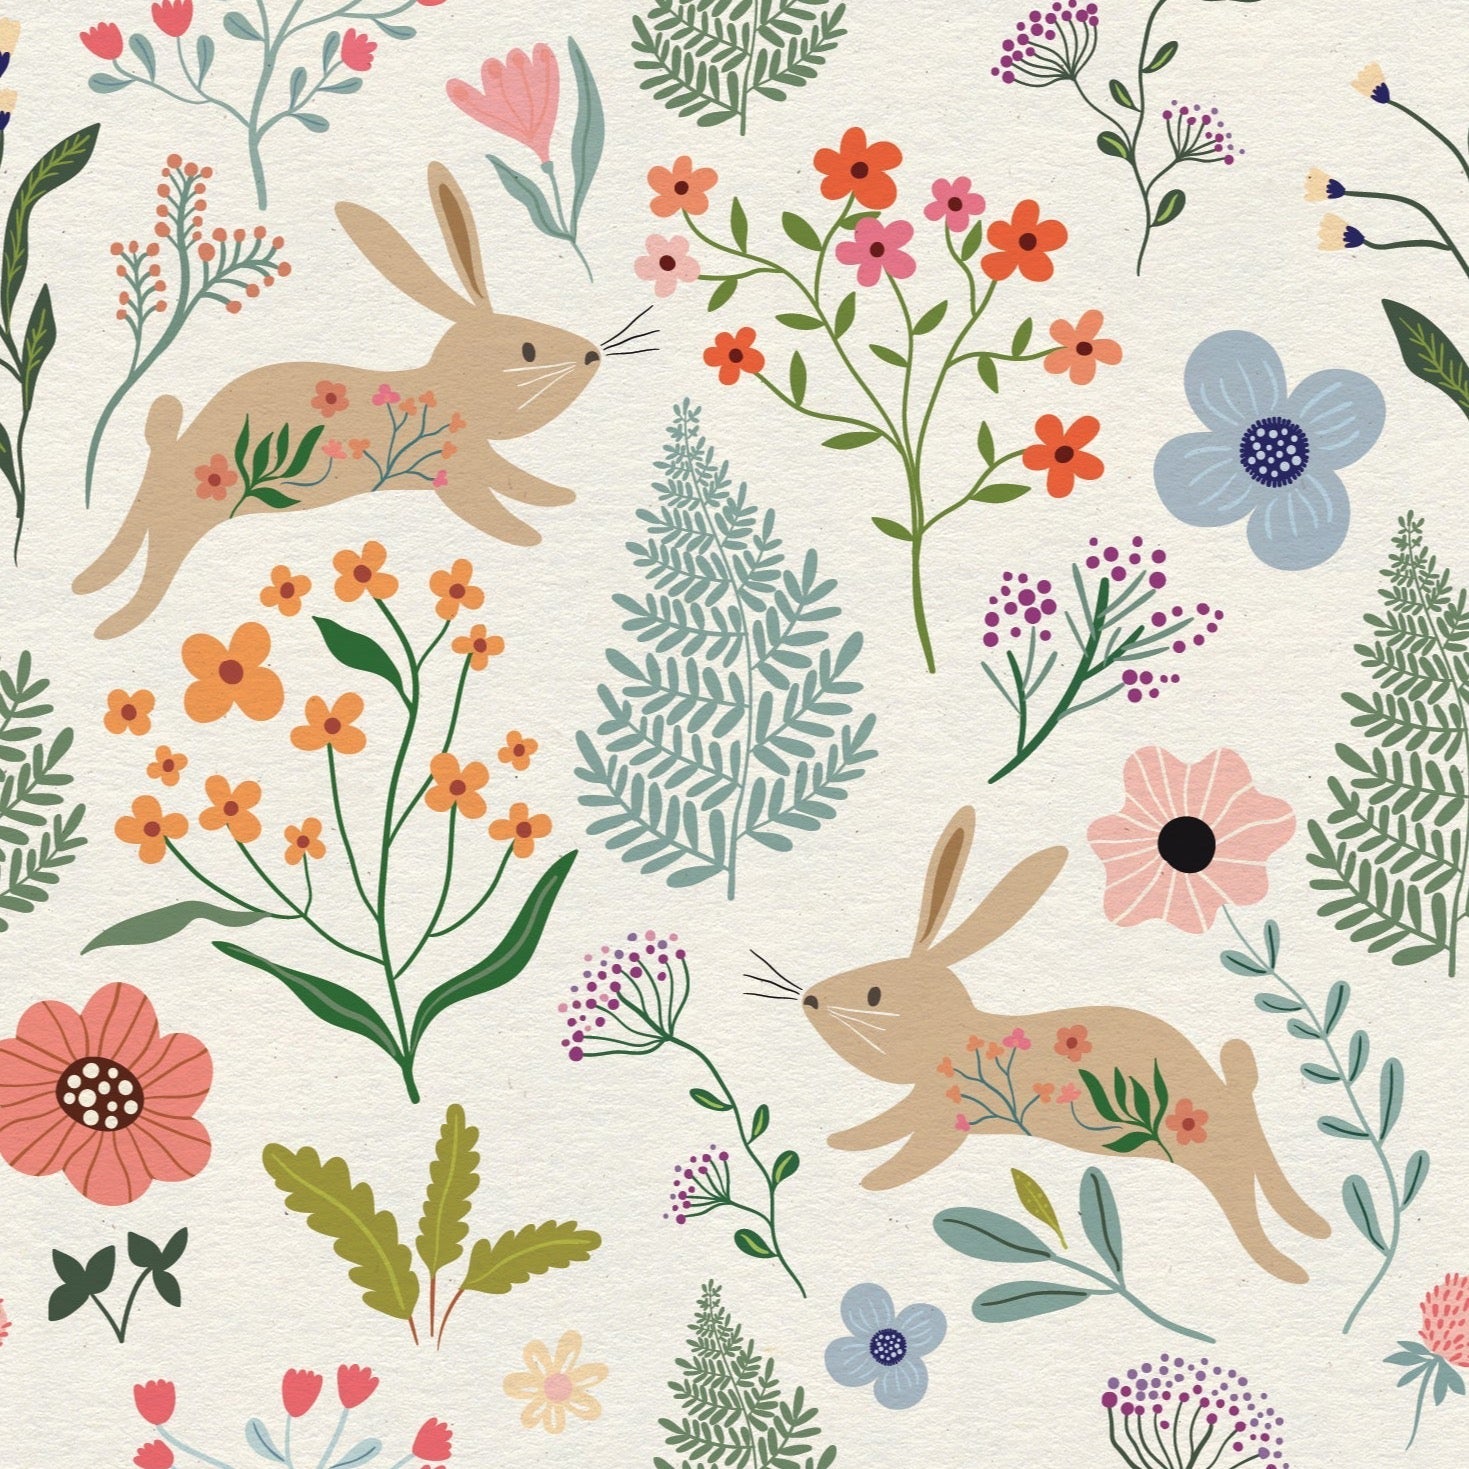 Close-up of Colourful Spring Bunnies Wallpaper, showcasing detailed illustrations of bunnies in mid-leap amidst a colorful array of spring flowers, leaves, and scattered dots, all set on a light beige background, ideal for a nursery or playroom.